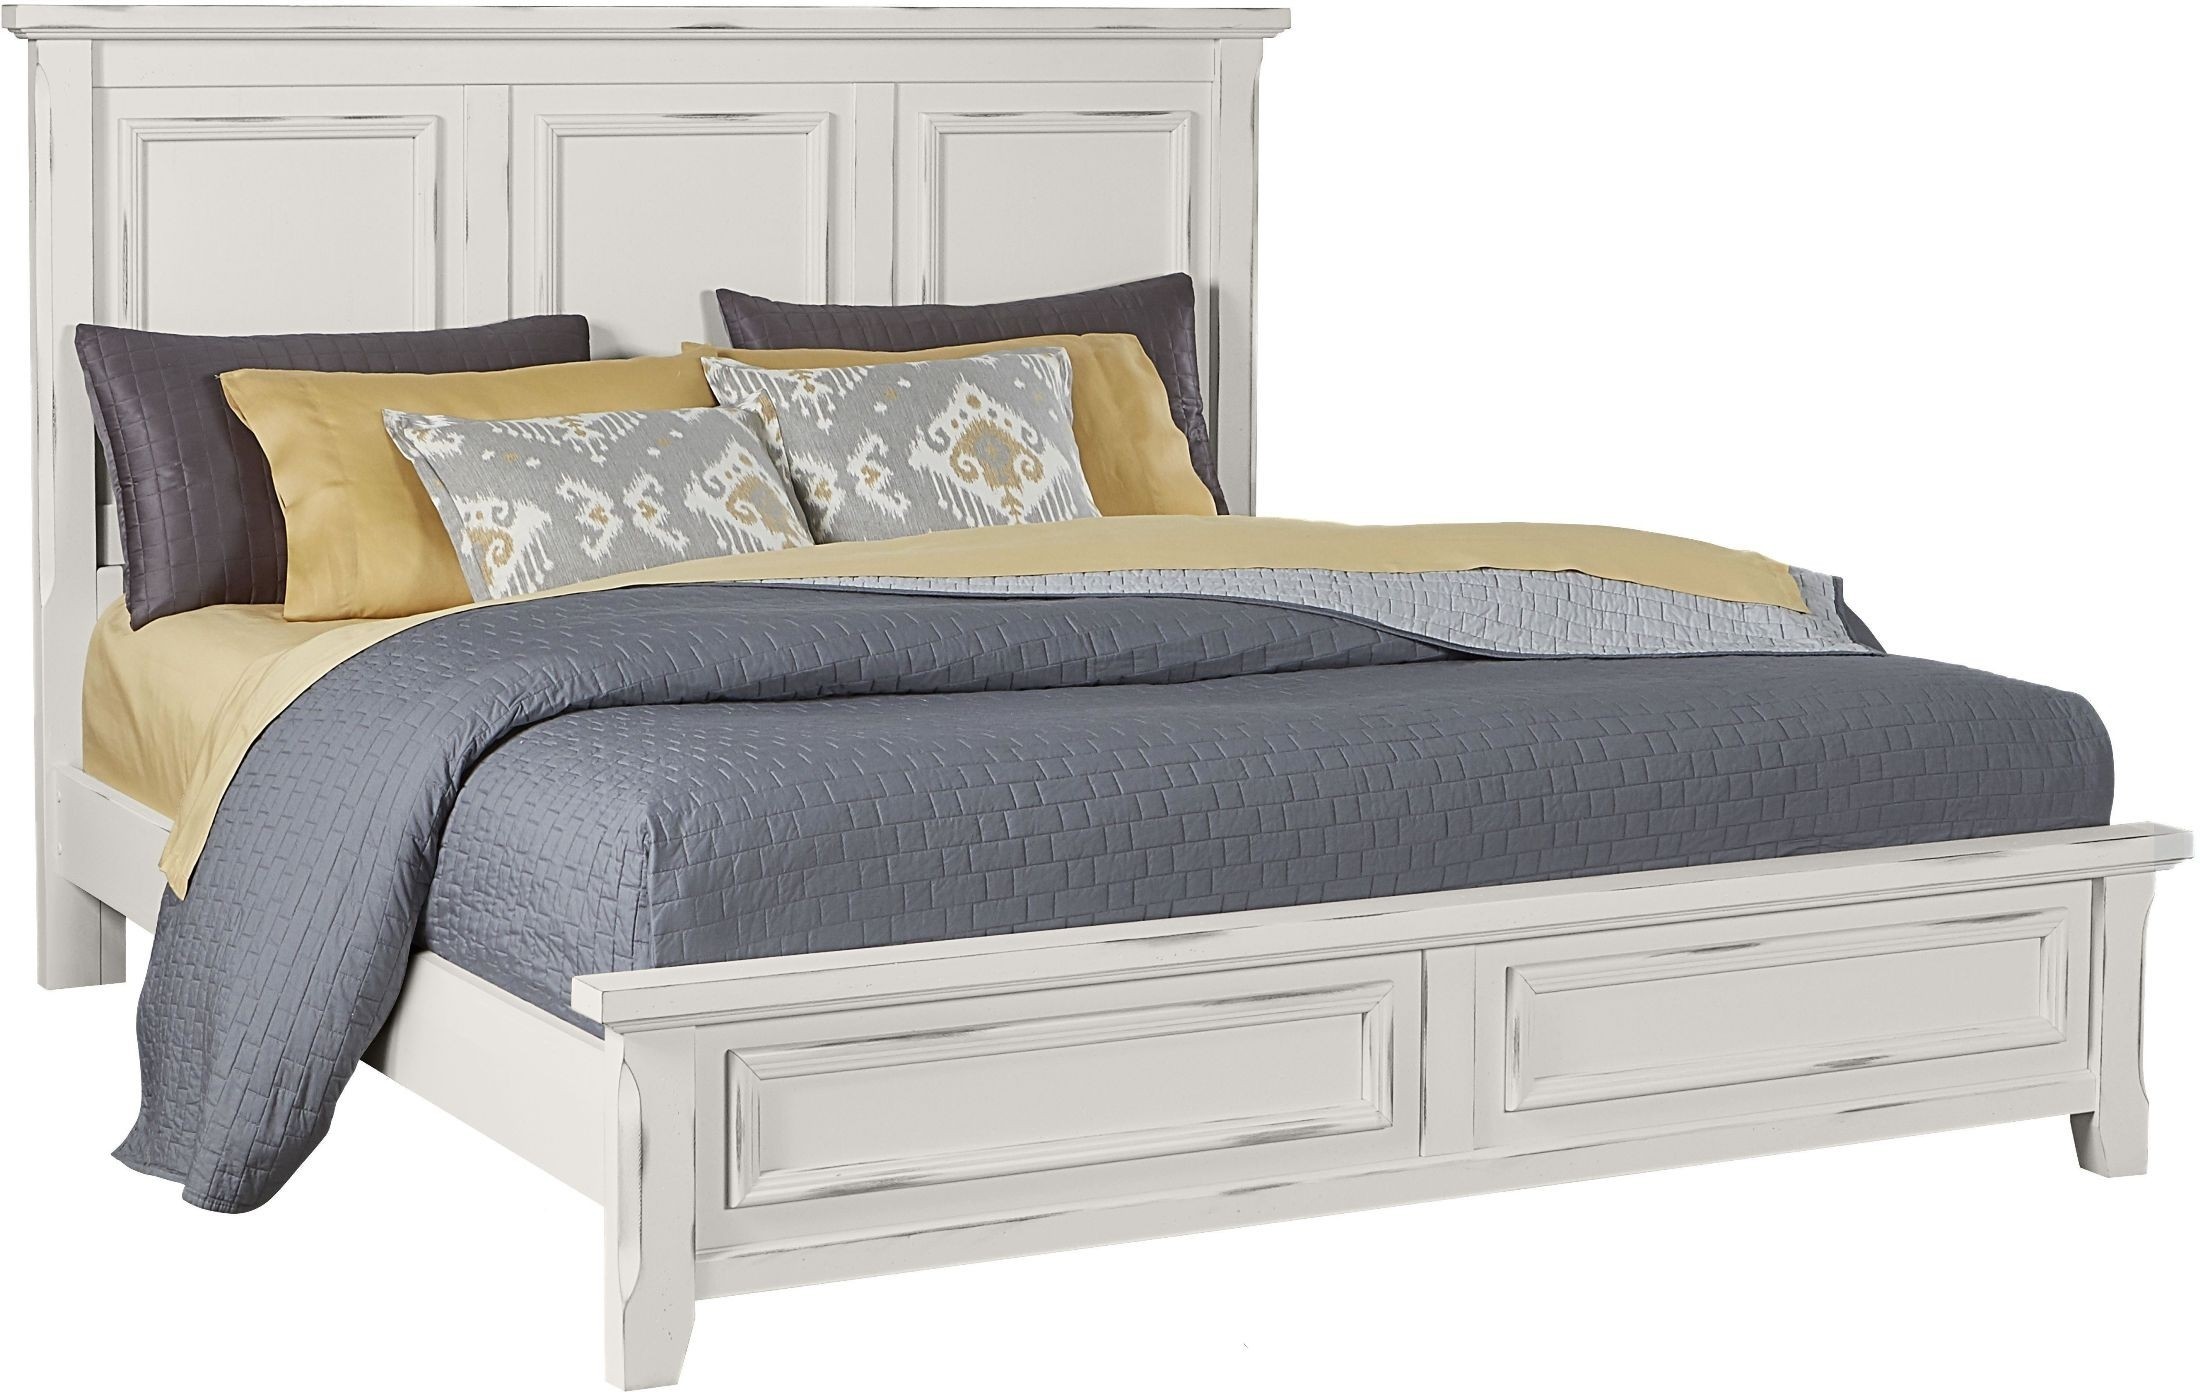 Timber creek distressed white king mansion bed from